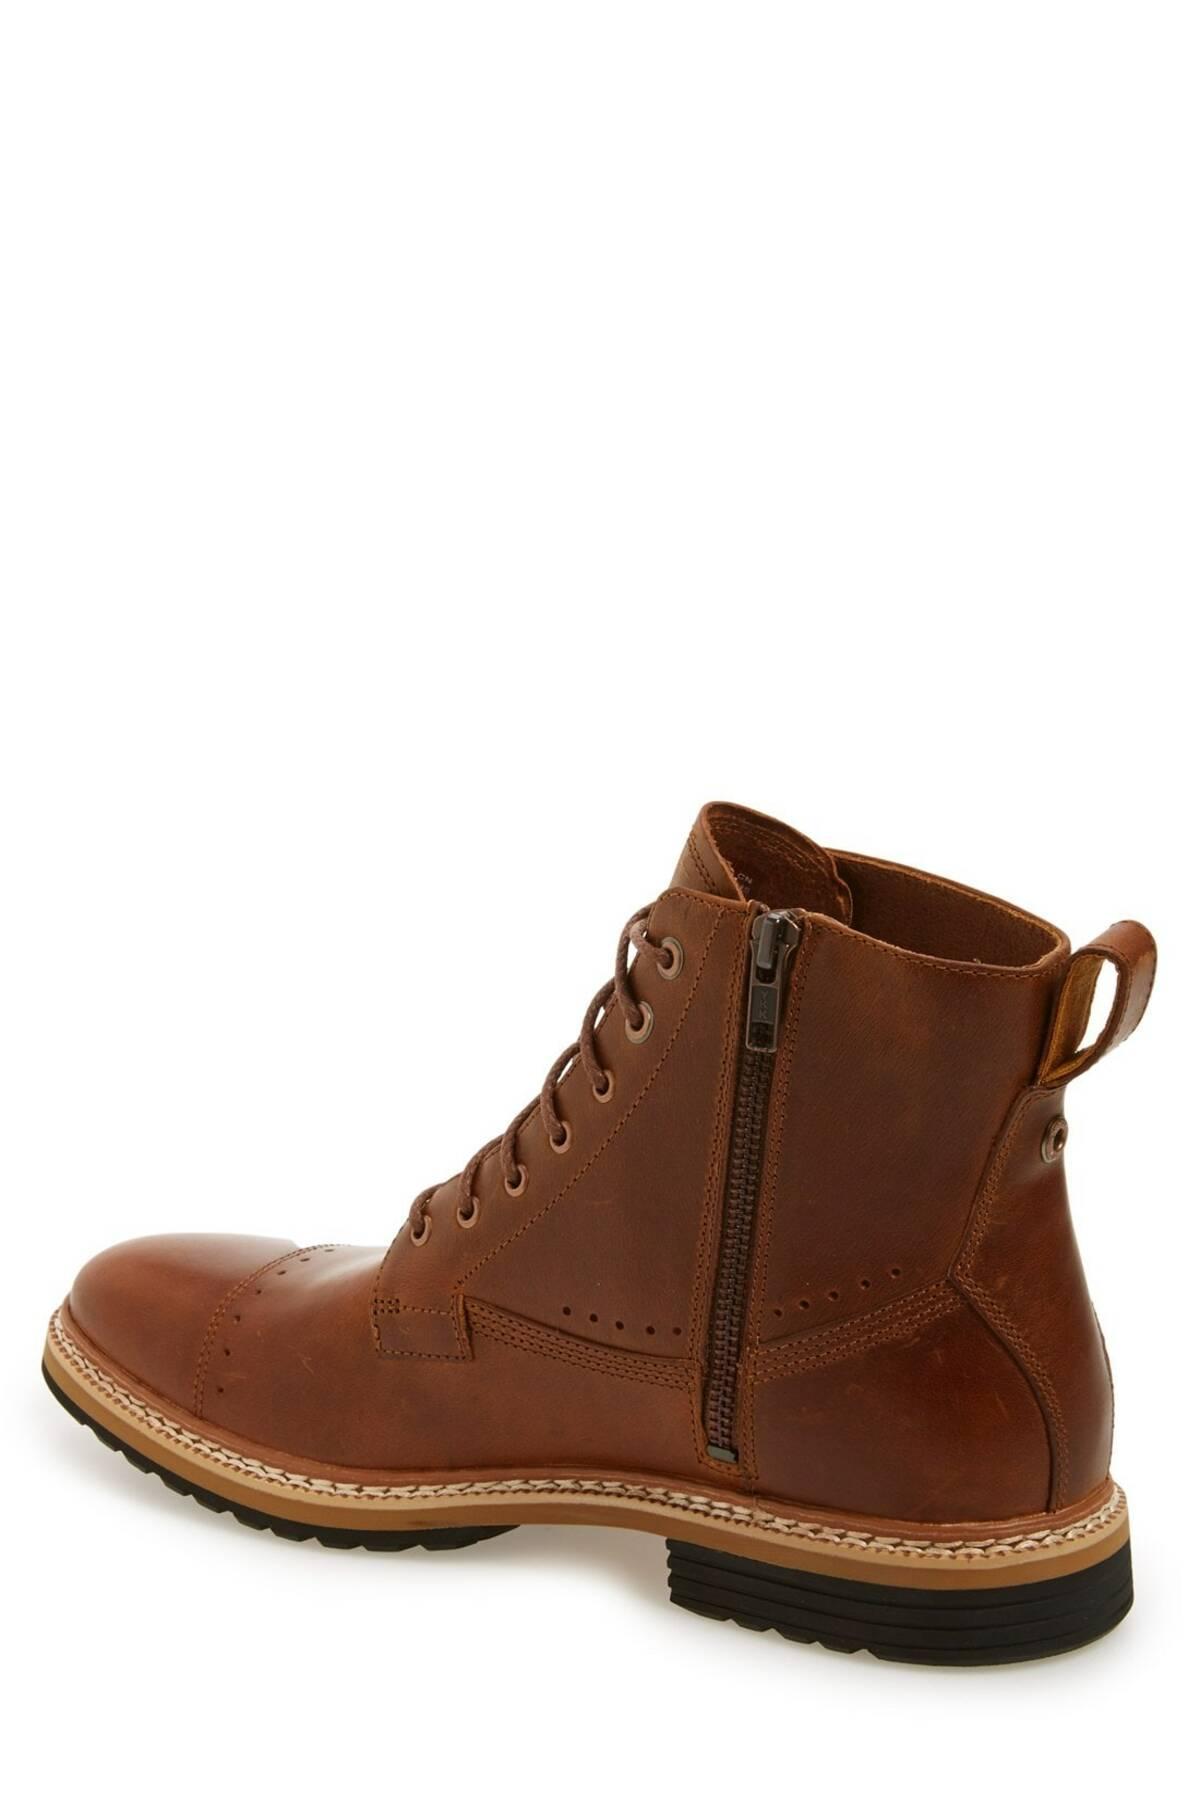 timberland westhaven 6